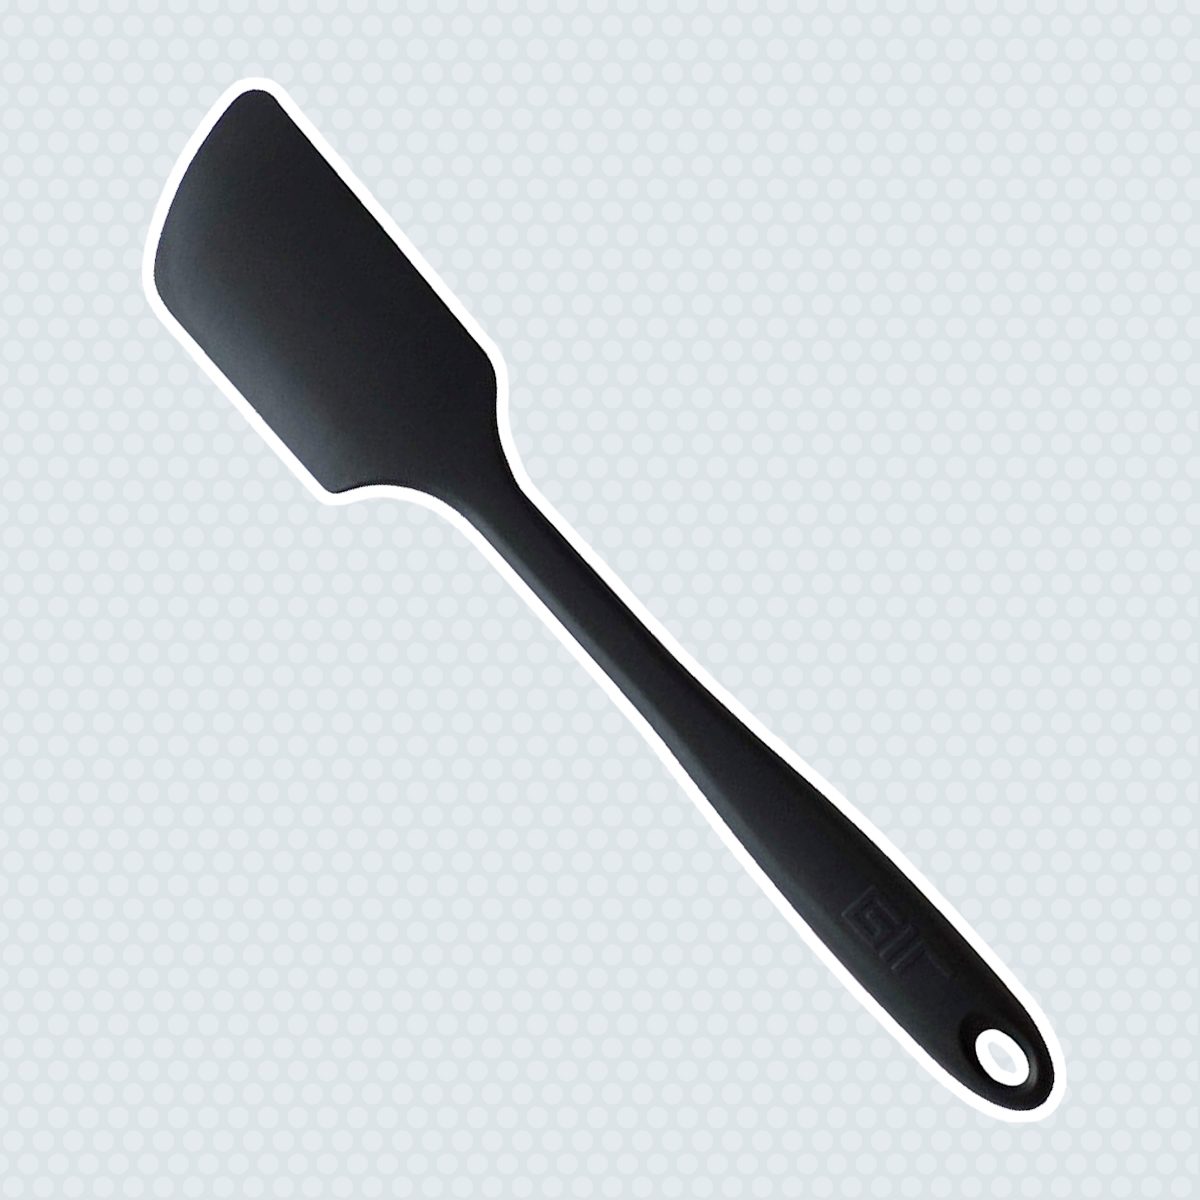 https://www.tasteofhome.com/wp-content/uploads/2019/07/Silicone-Spatula.jpg?fit=700%2C700